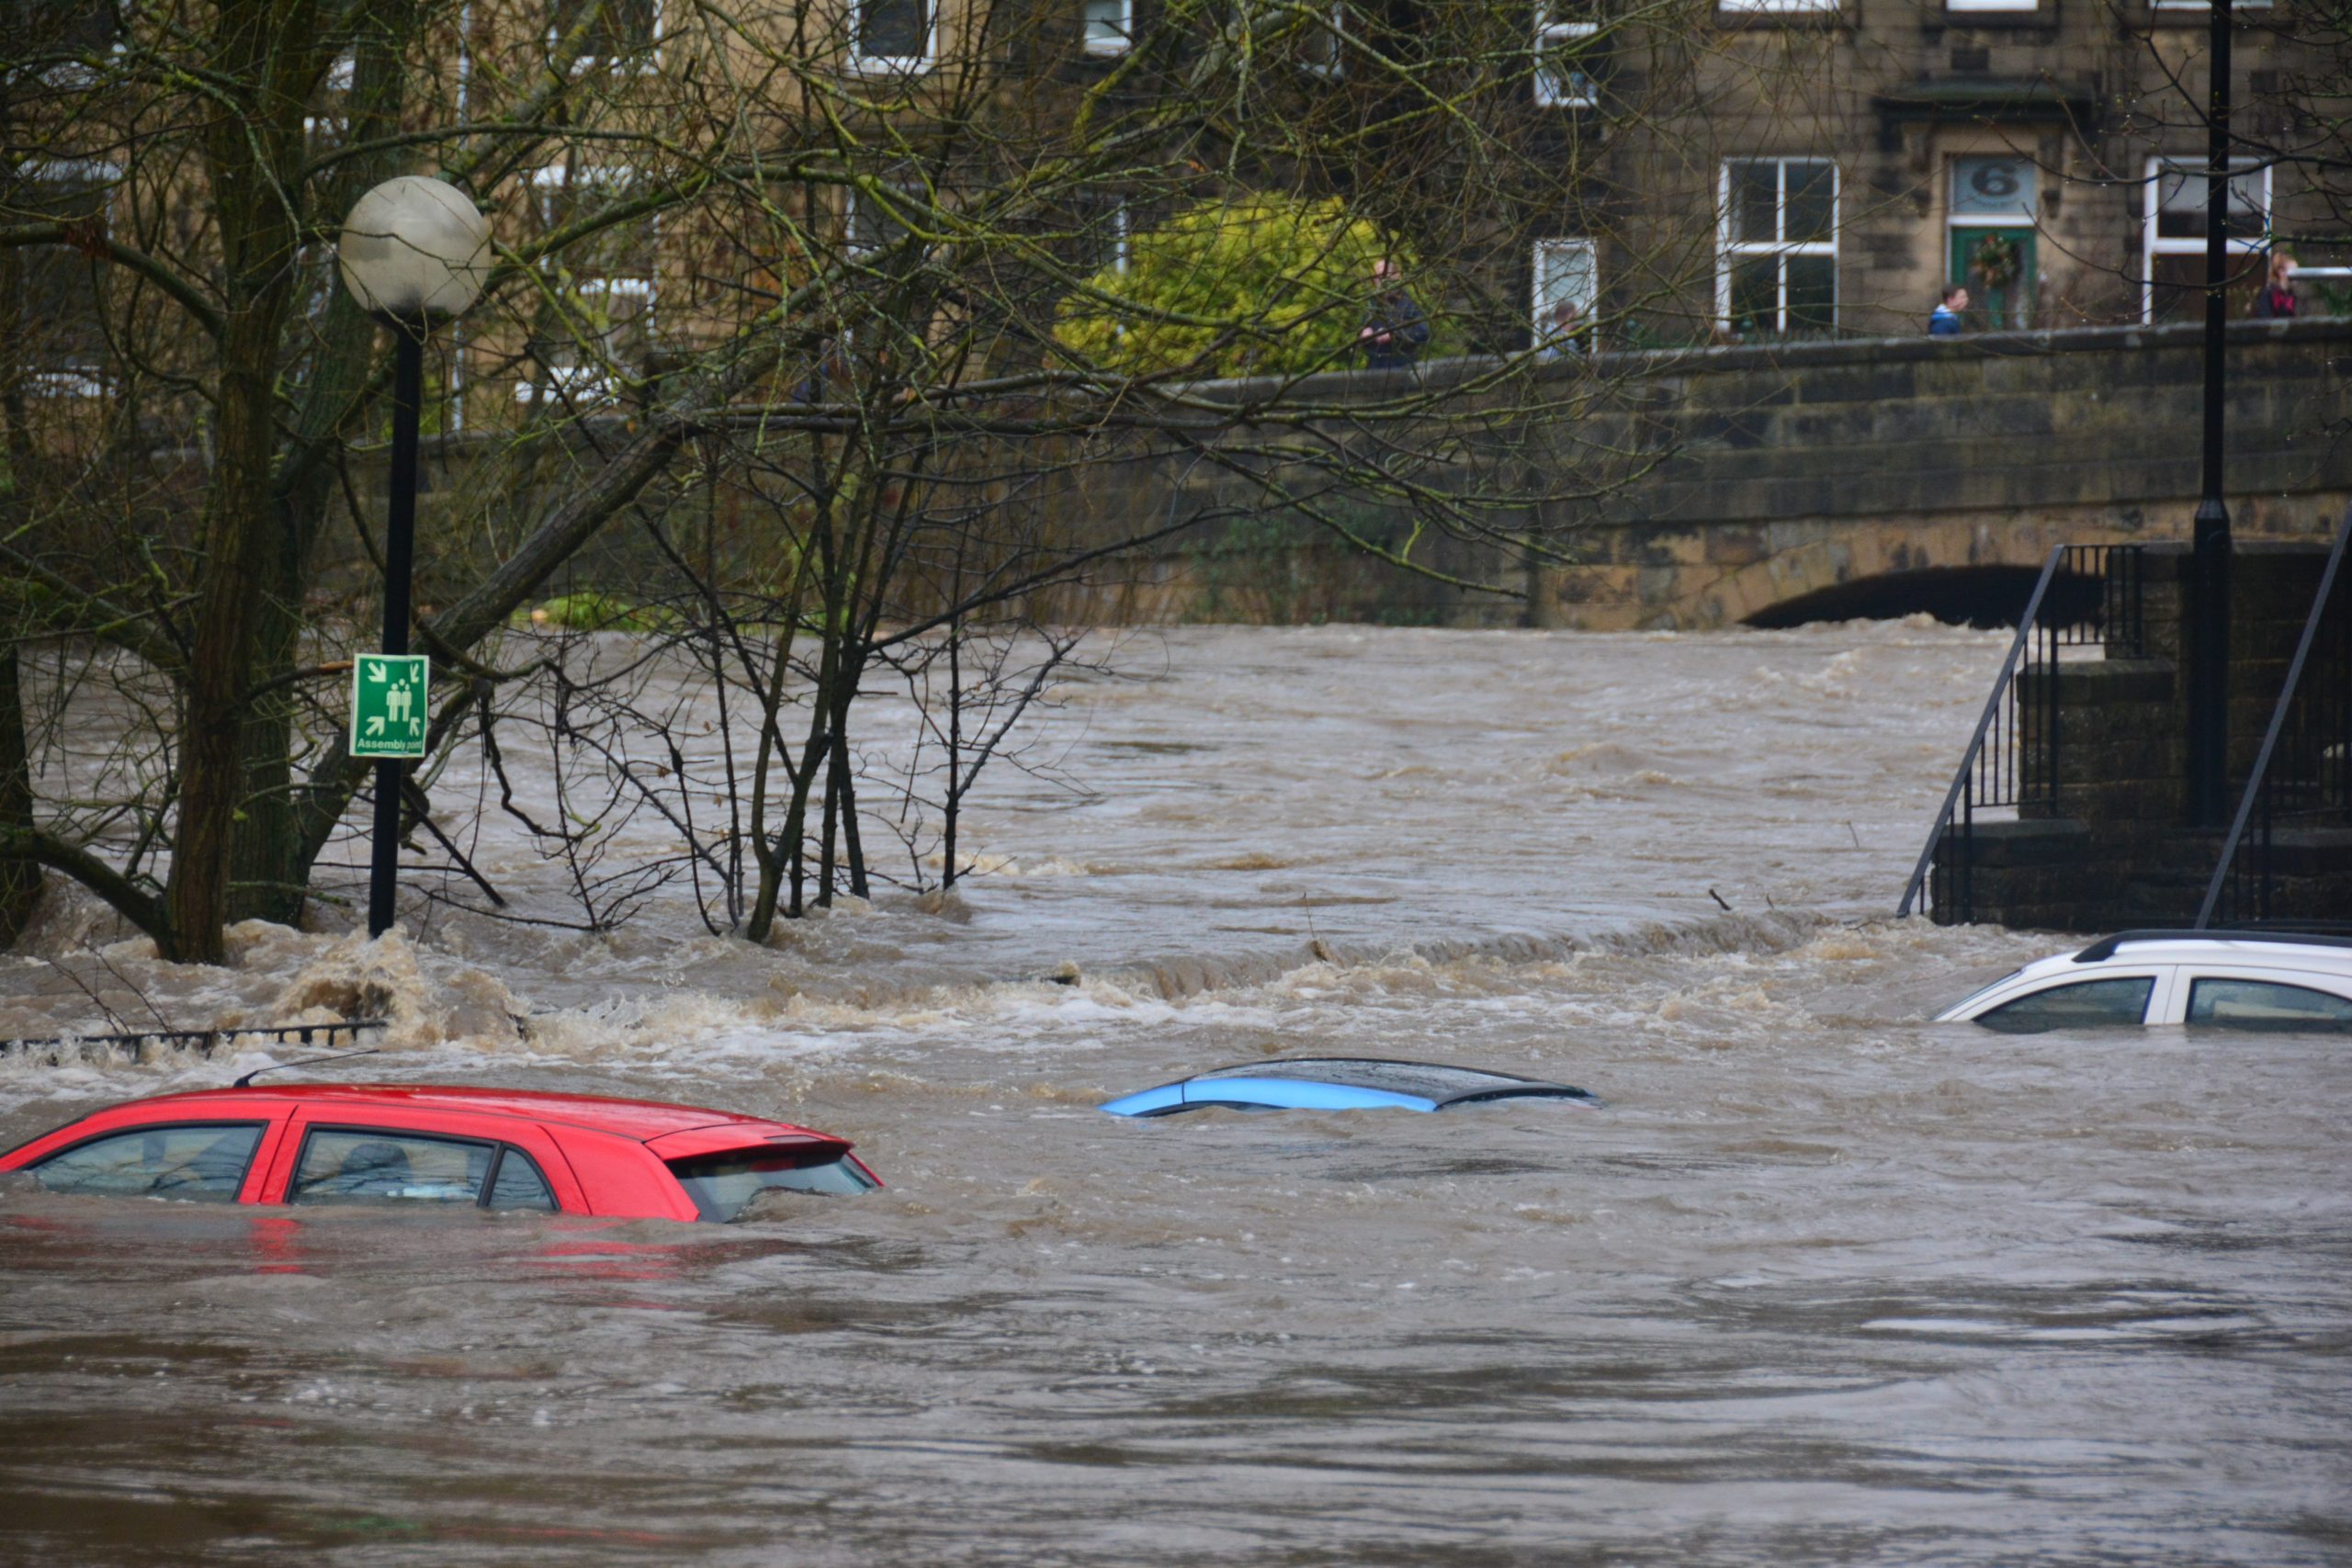 cars under water representing being emotionally flooded